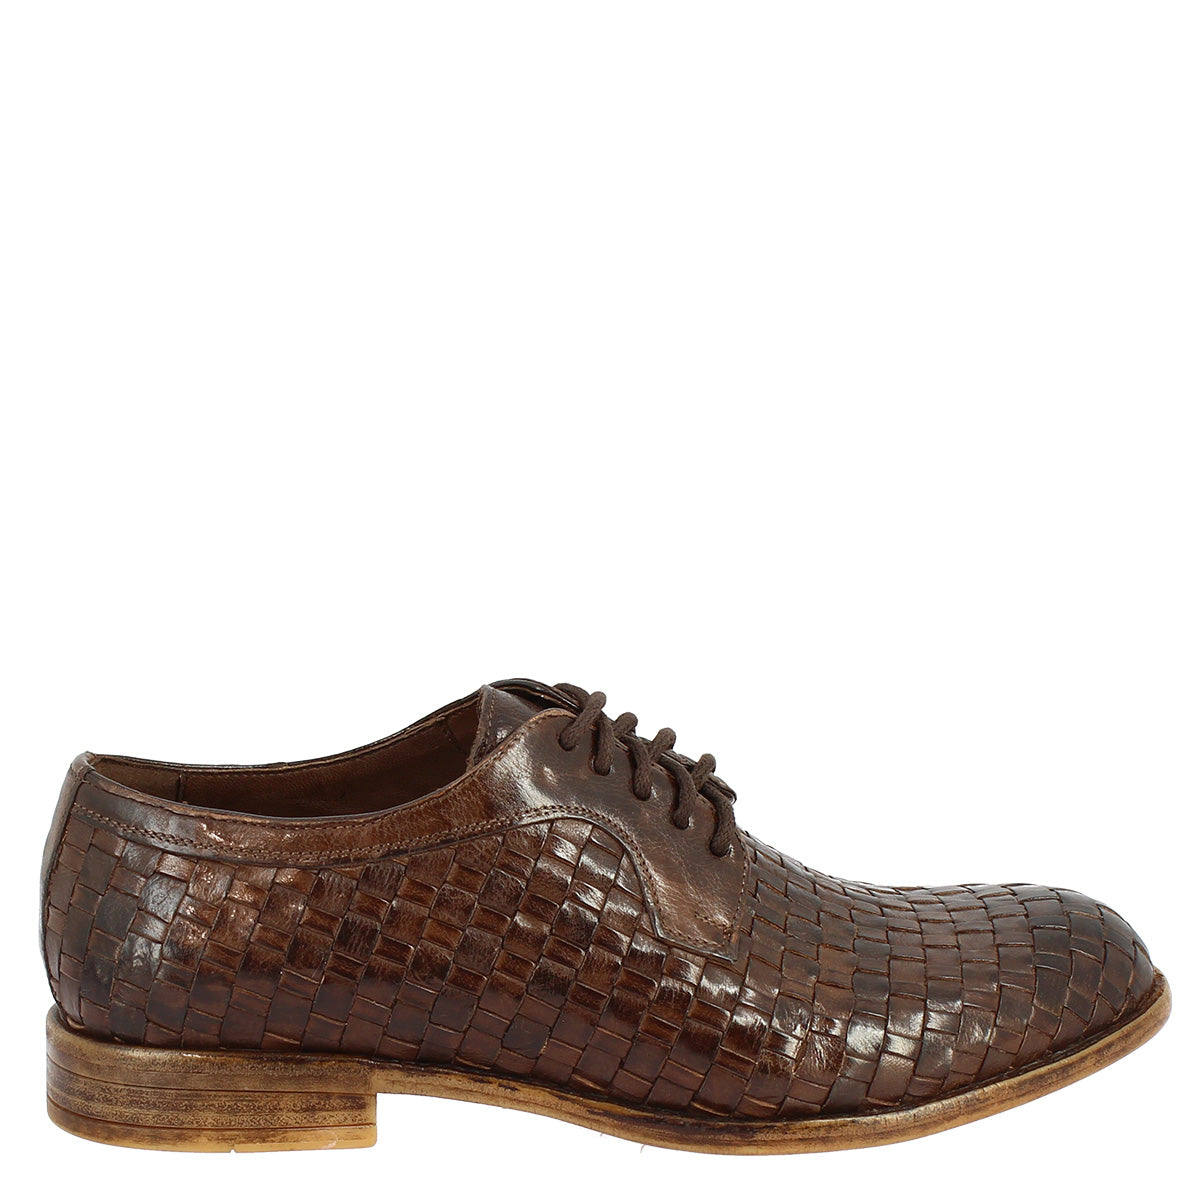 Men's lace-up shoes in dark brown woven leather